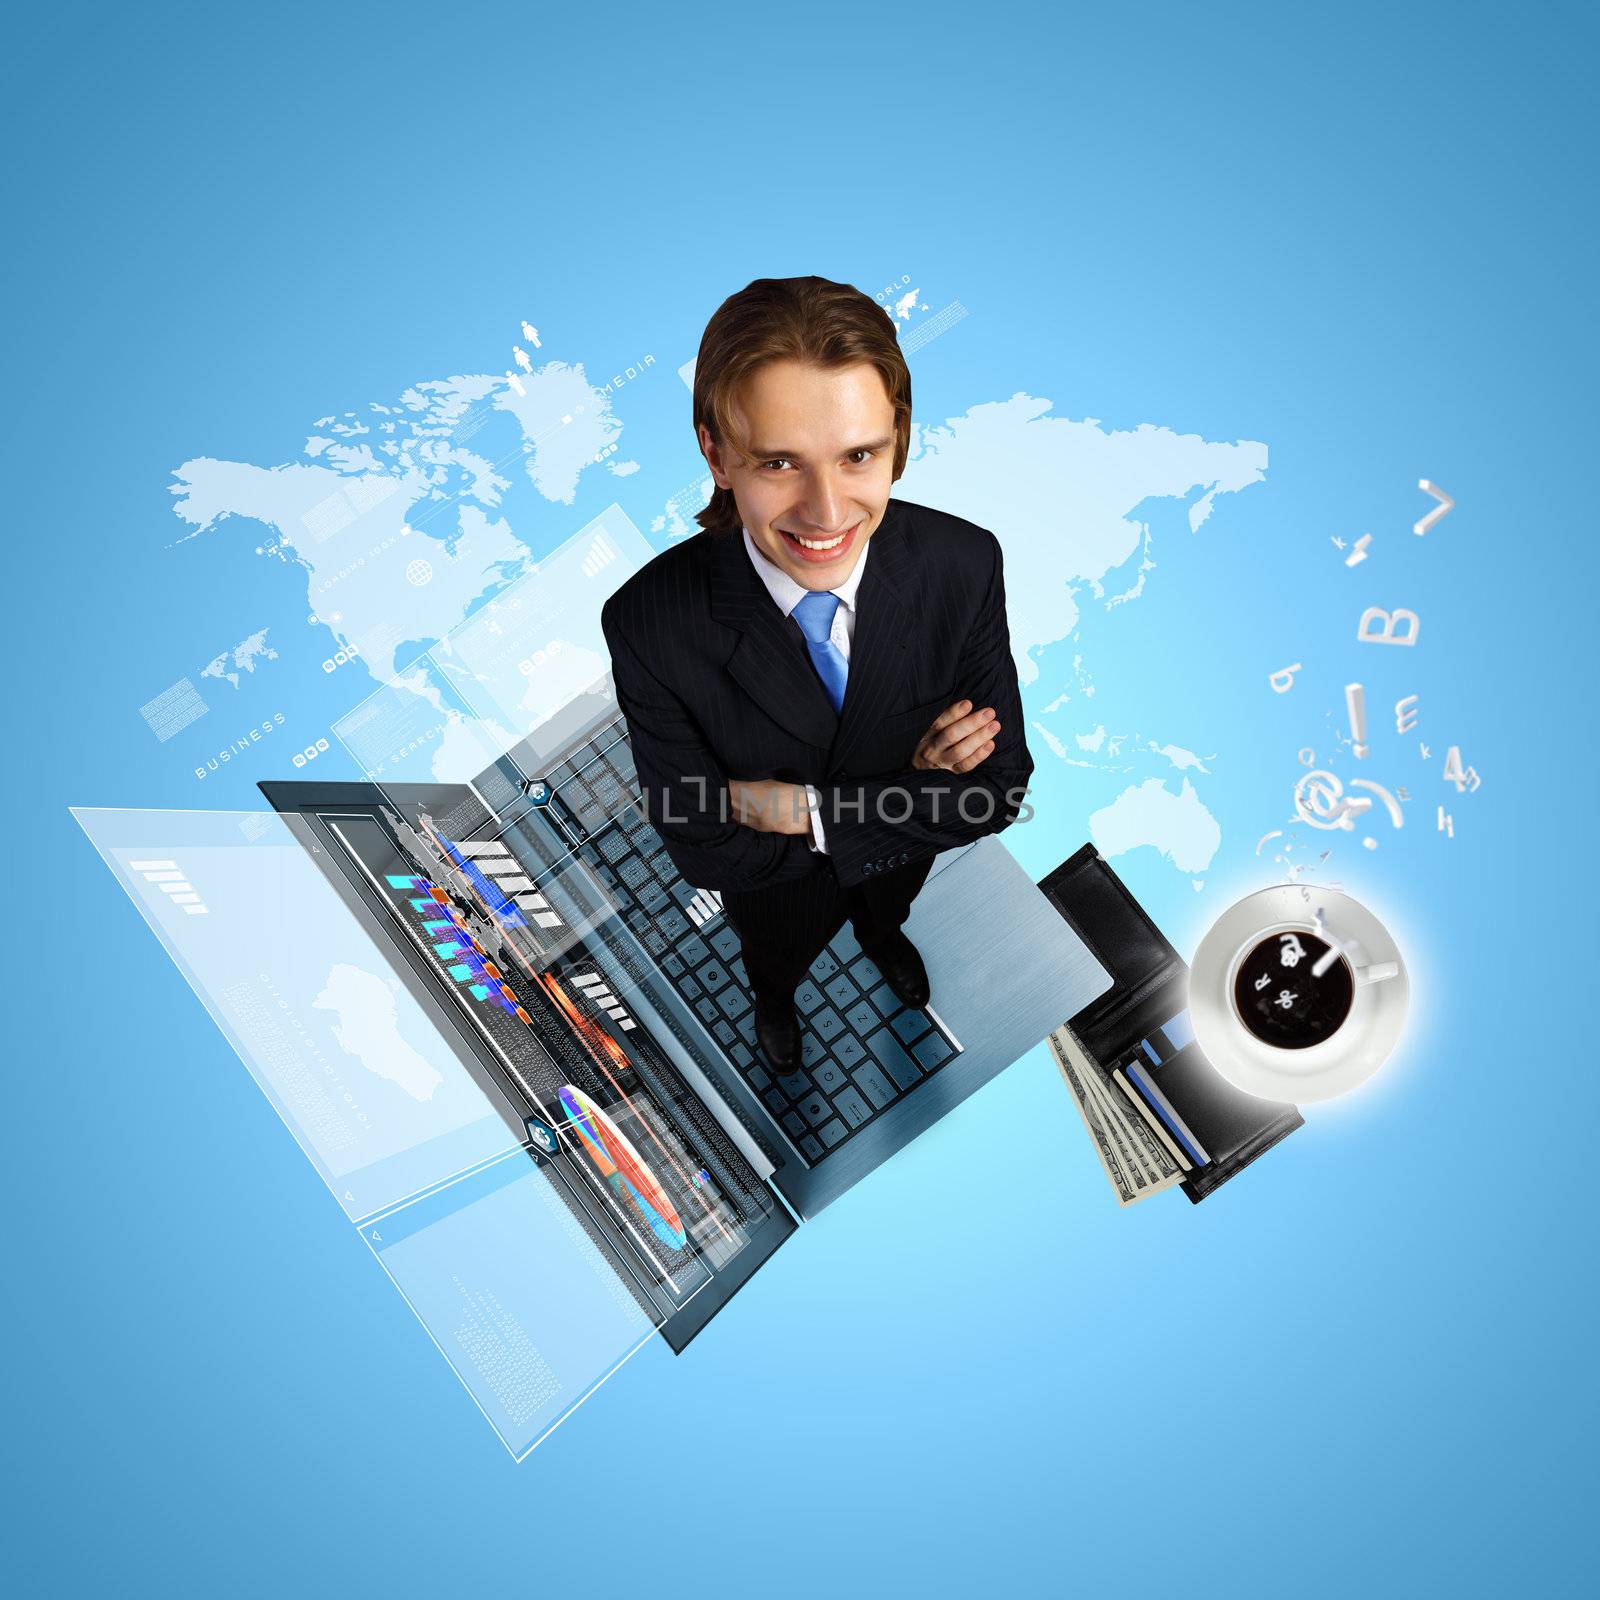 Modern technology illustration with computers and business person